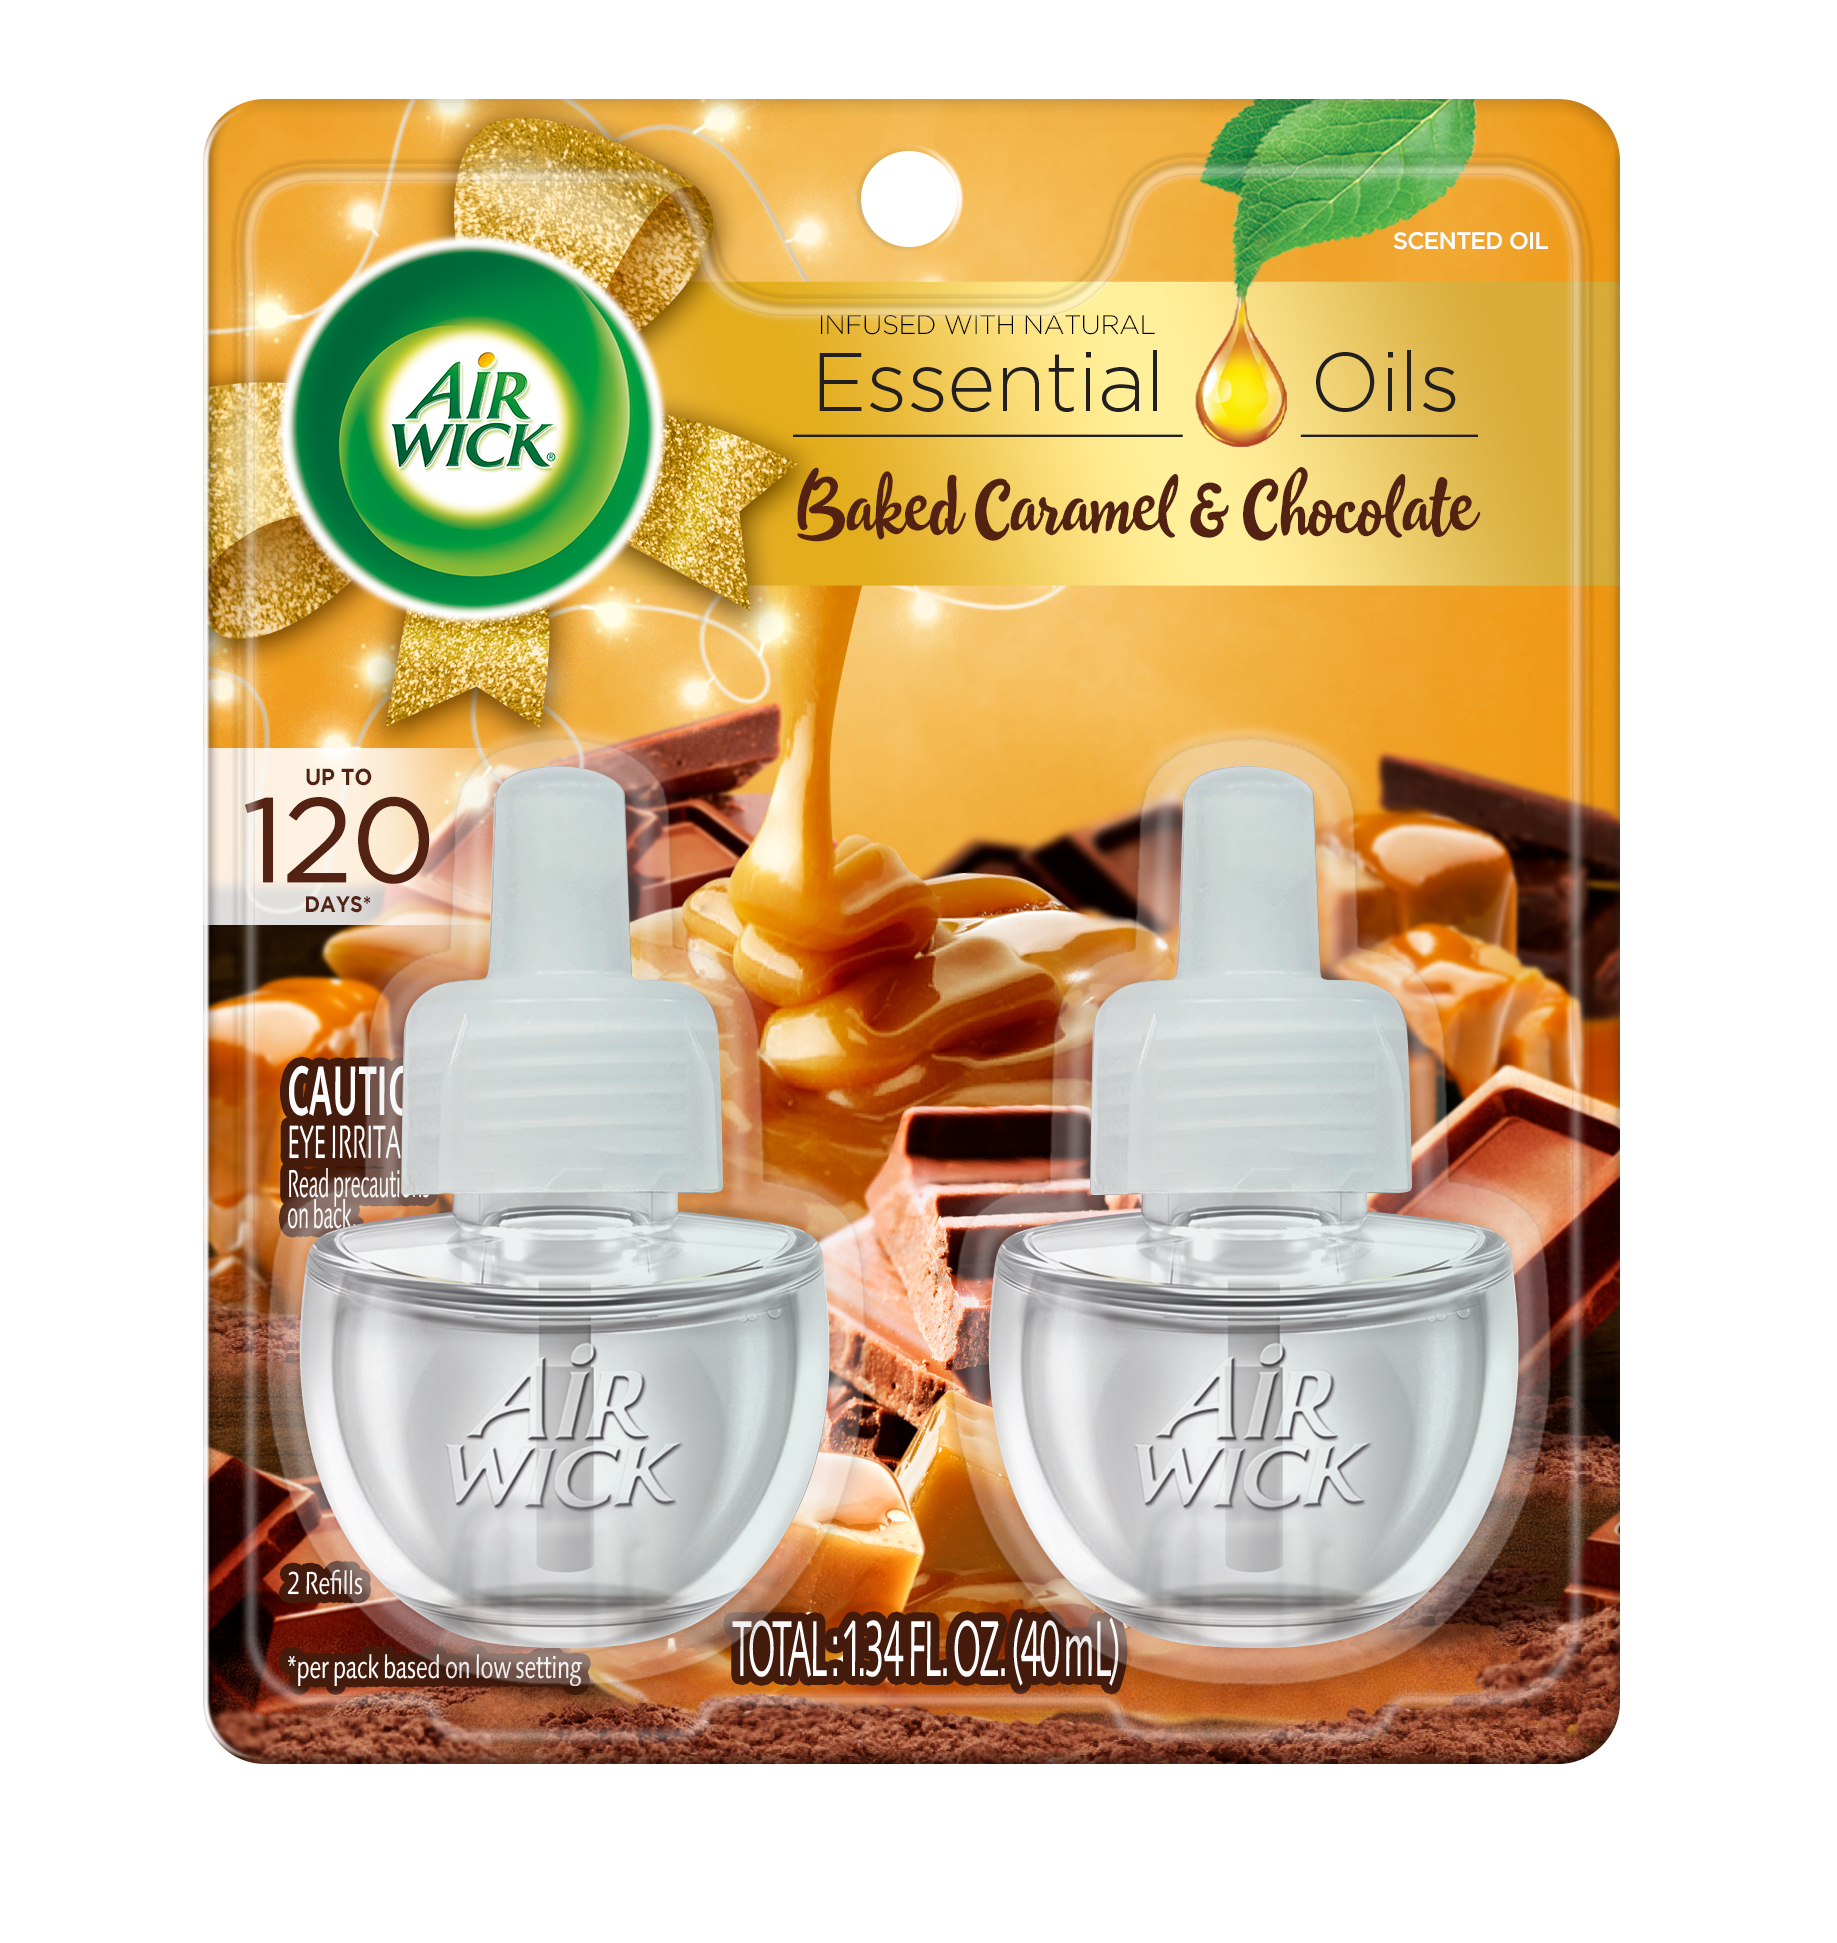 AIR WICK Scented Oil  Baked Caramel  Chocolate Discontinued